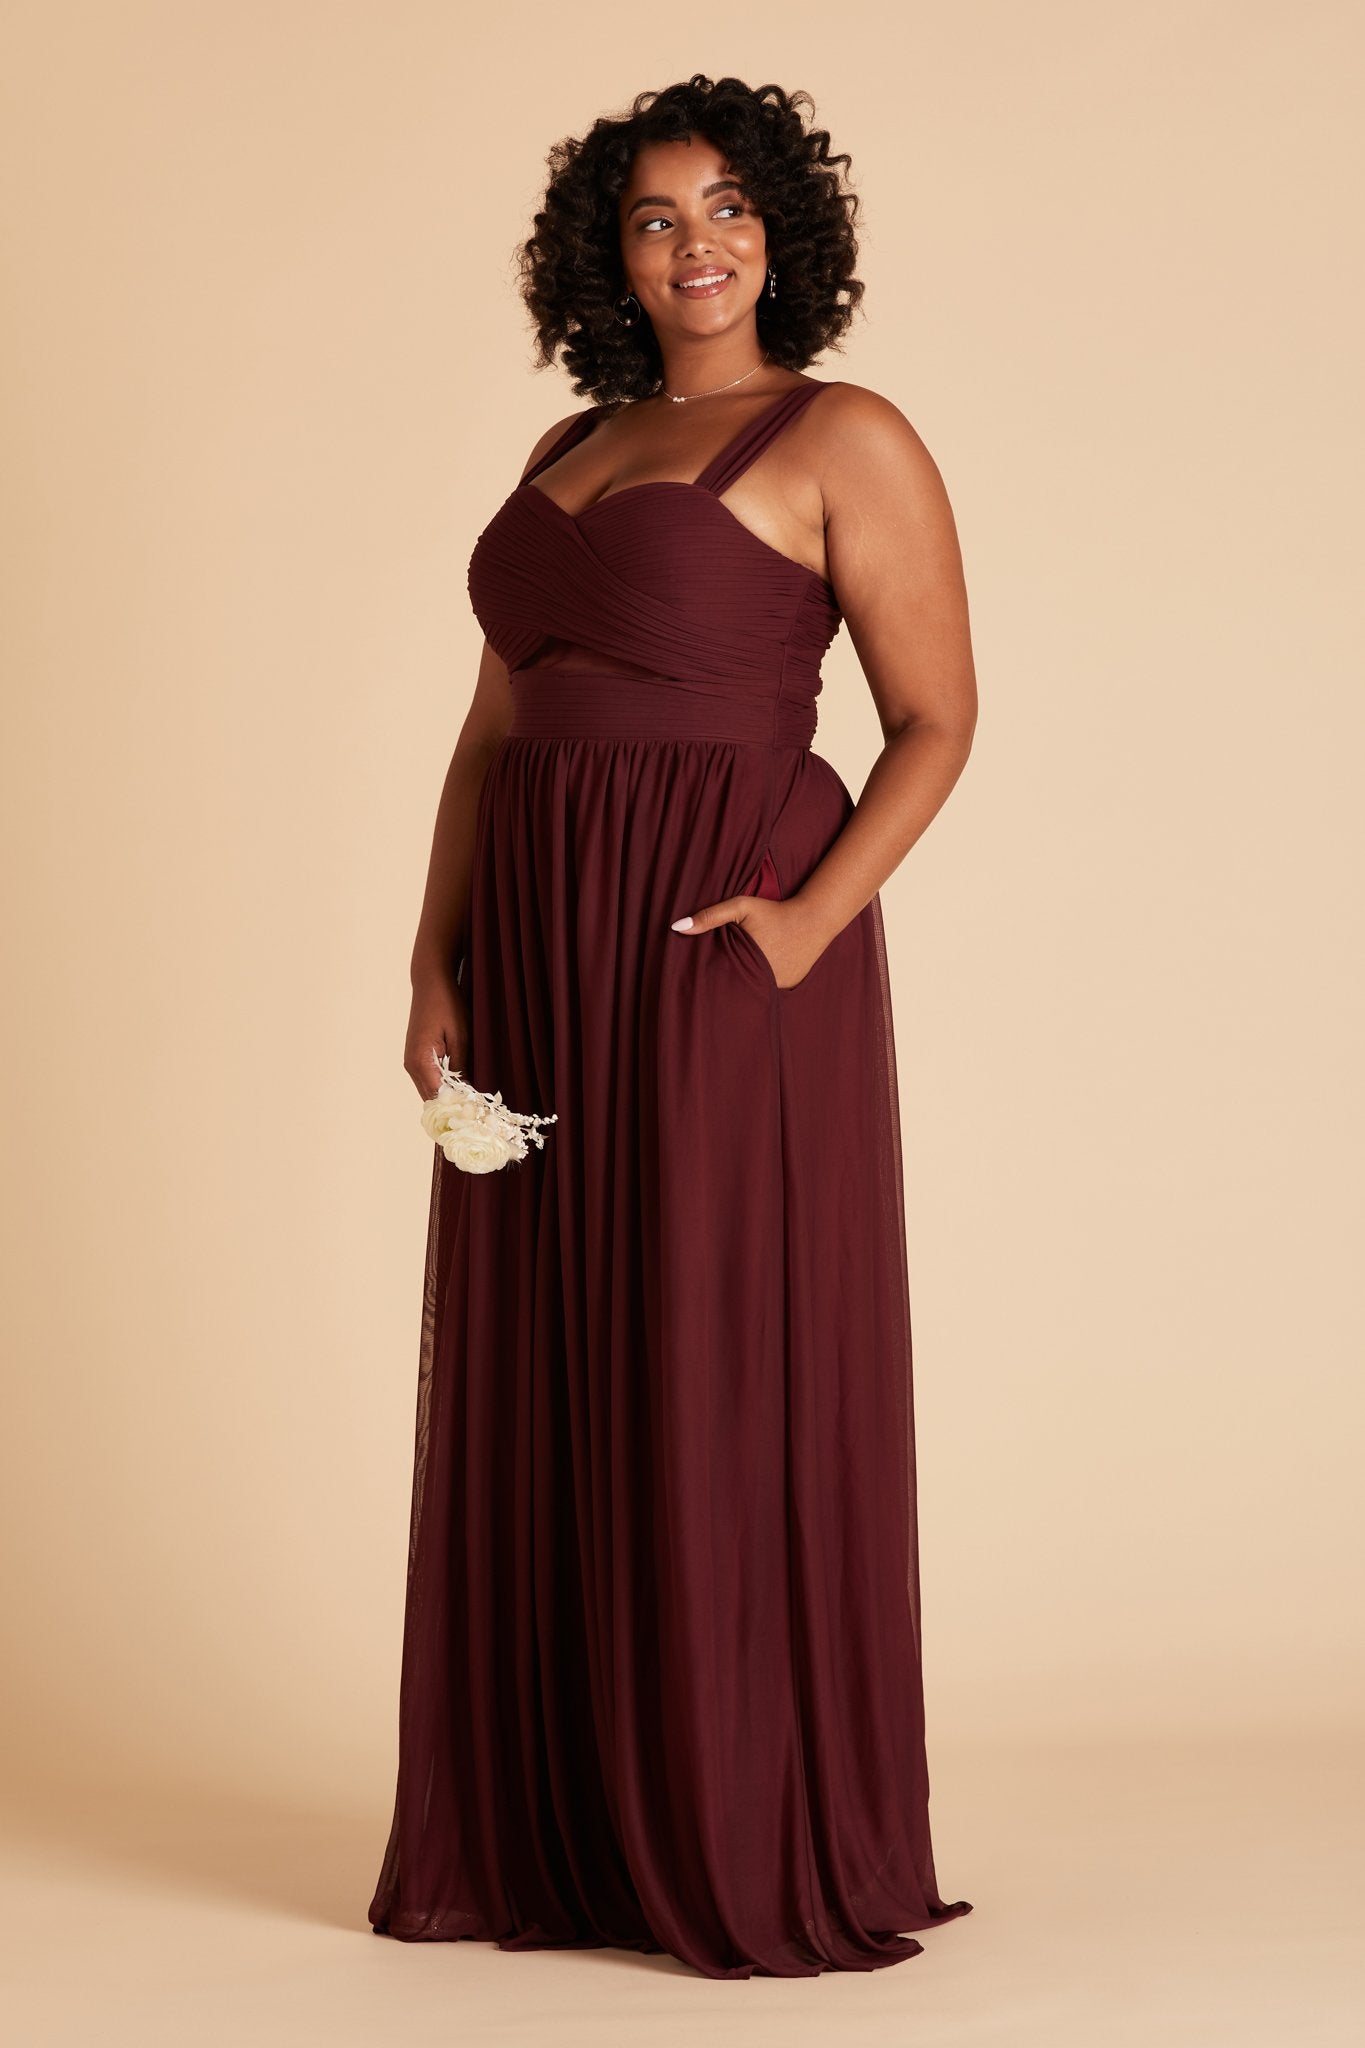 Elsye plus size bridesmaid dress in cabernet burgundy chiffon by Birdy Grey, side view with hand in pocket